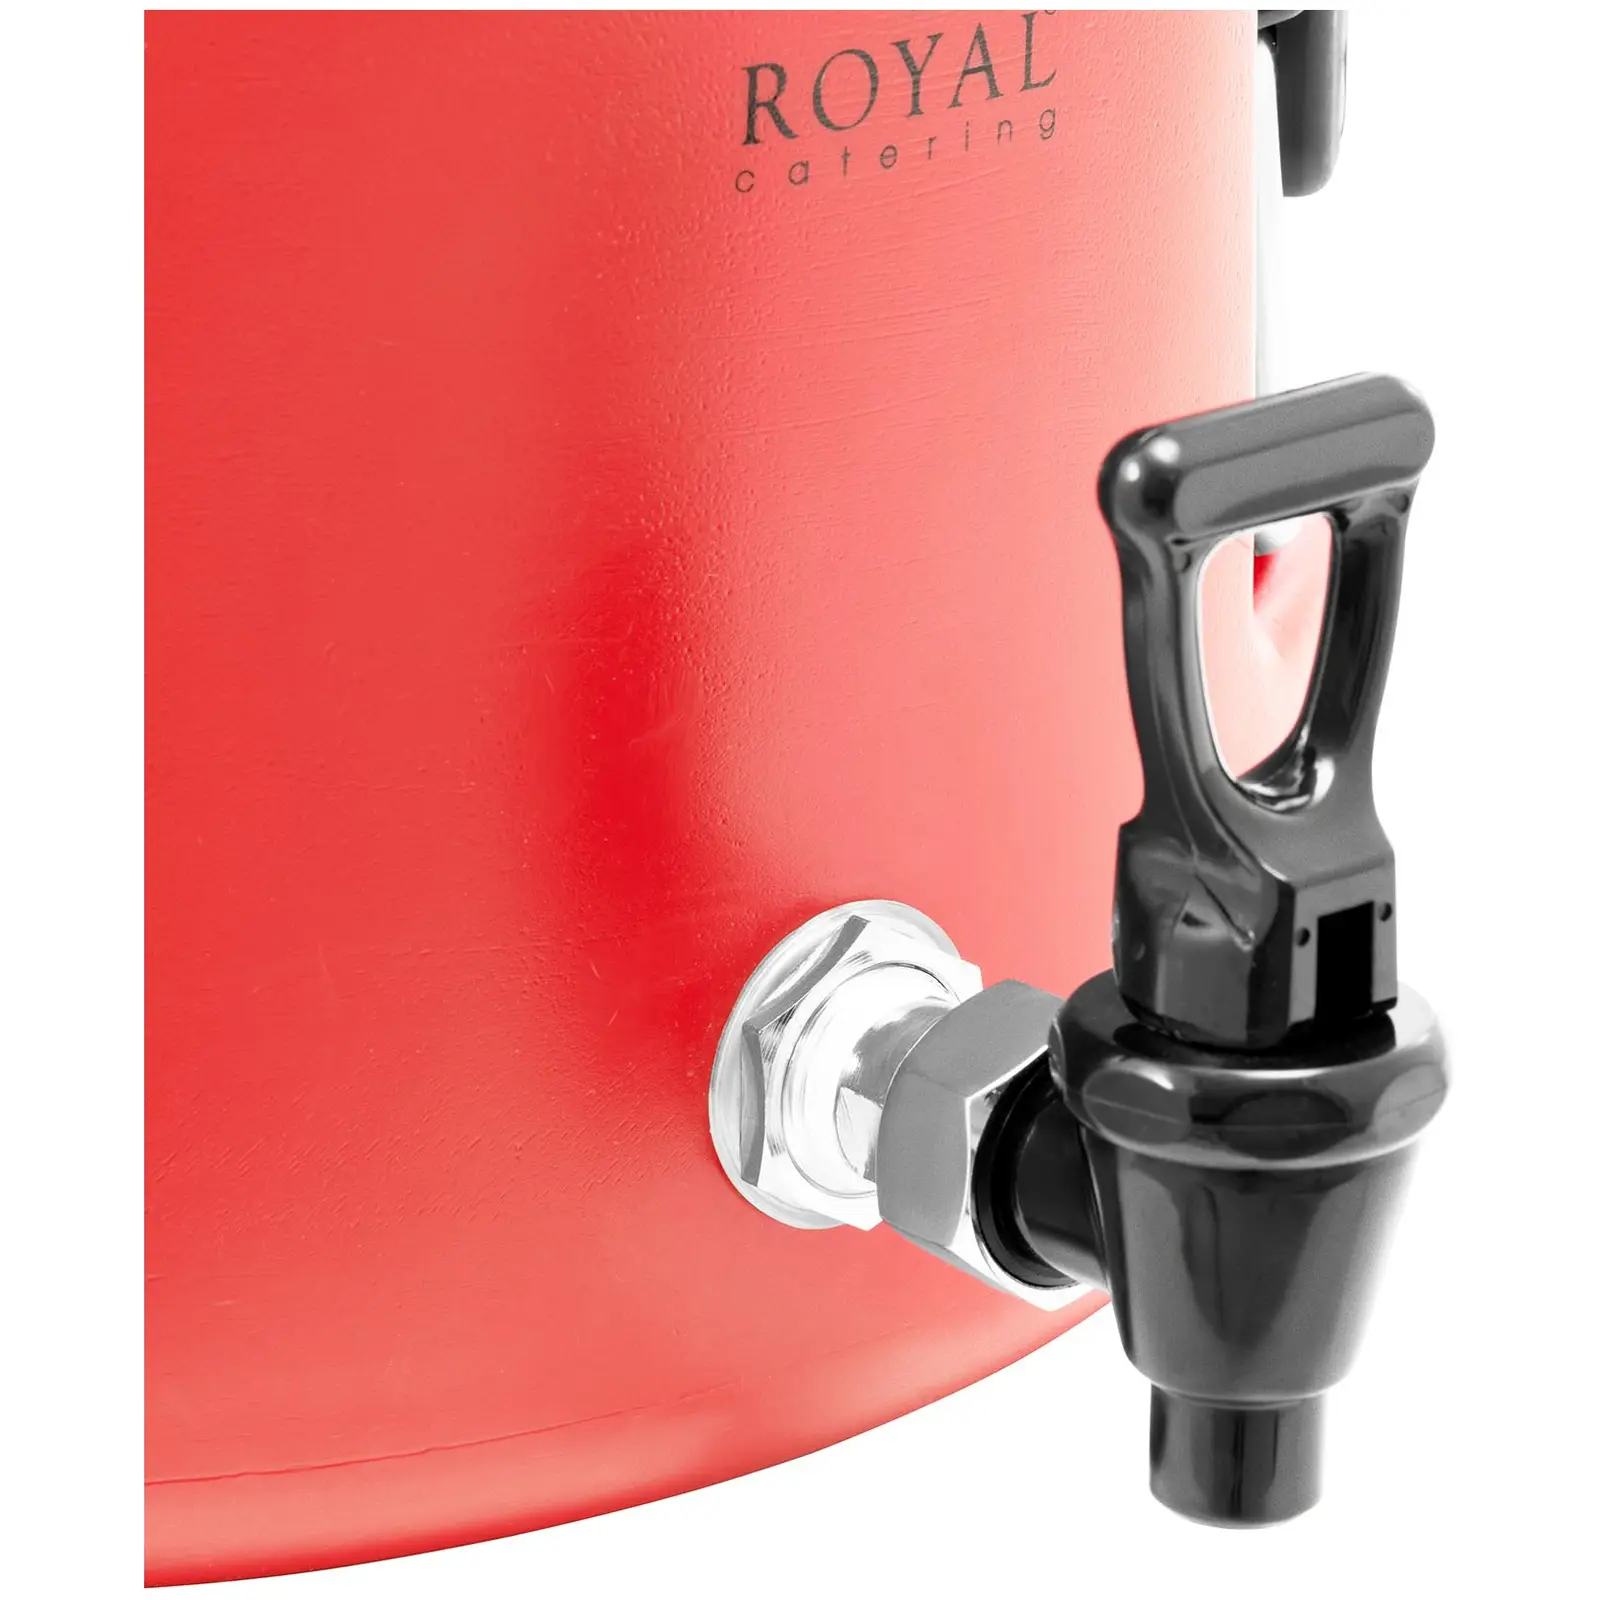 Insulated container - 15 L - Drain tap - Royal Catering